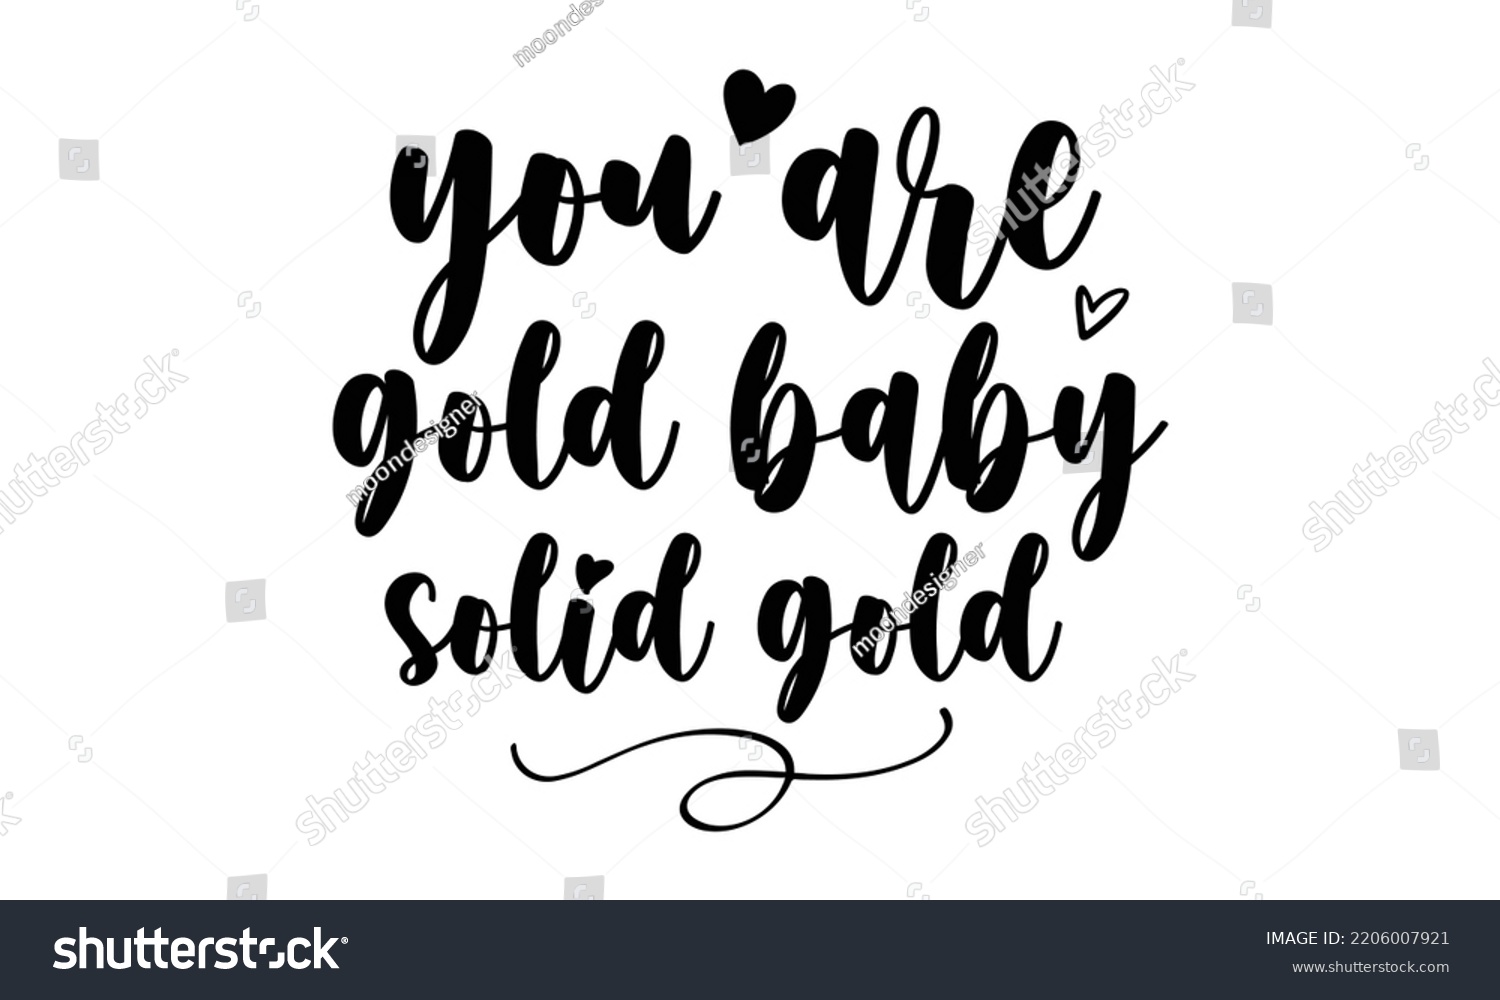 SVG of You are gold baby solid gold - Inspirational t shirts design, Calligraphy design, svg Files for Cutting Cricut and Silhouette, Isolated on white background, EPS 10 svg